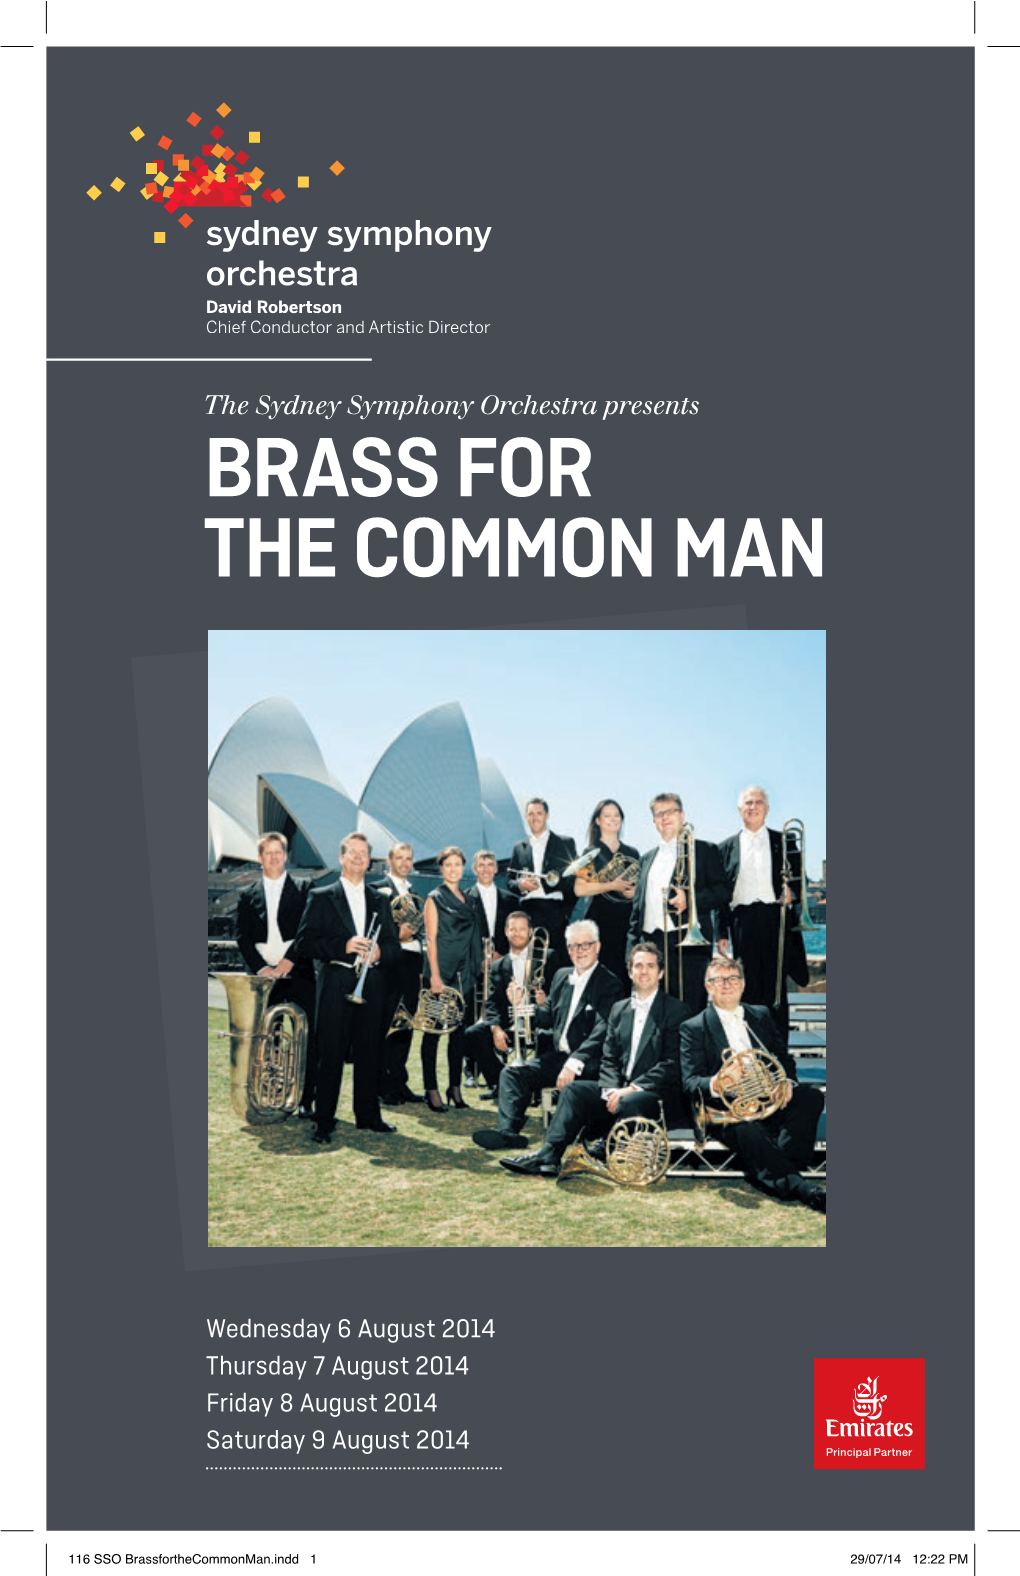 Brass for the Common Man